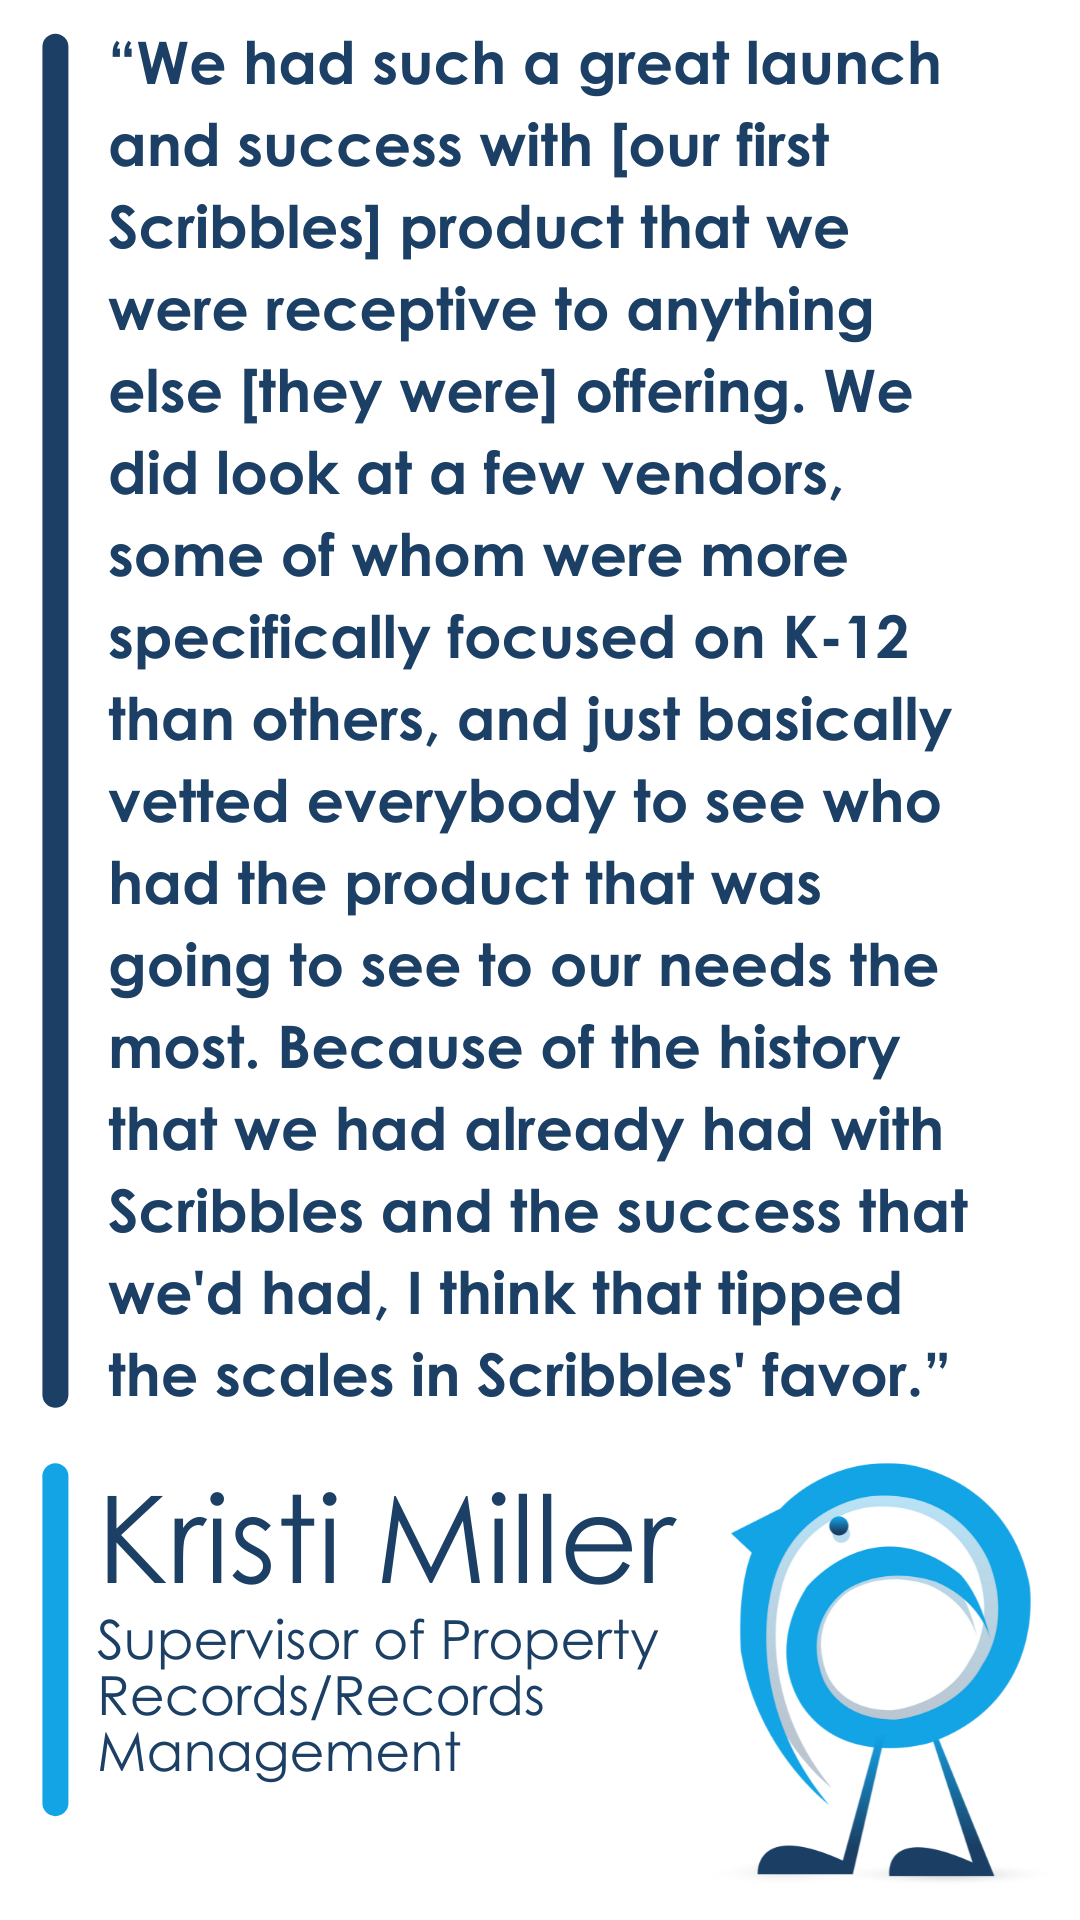 “We had such a great launch and success with [our first Scribbles] product that we were receptive to anything else [they were] offering. We did look at a few vendors, some of whom were more specifically focused on K-